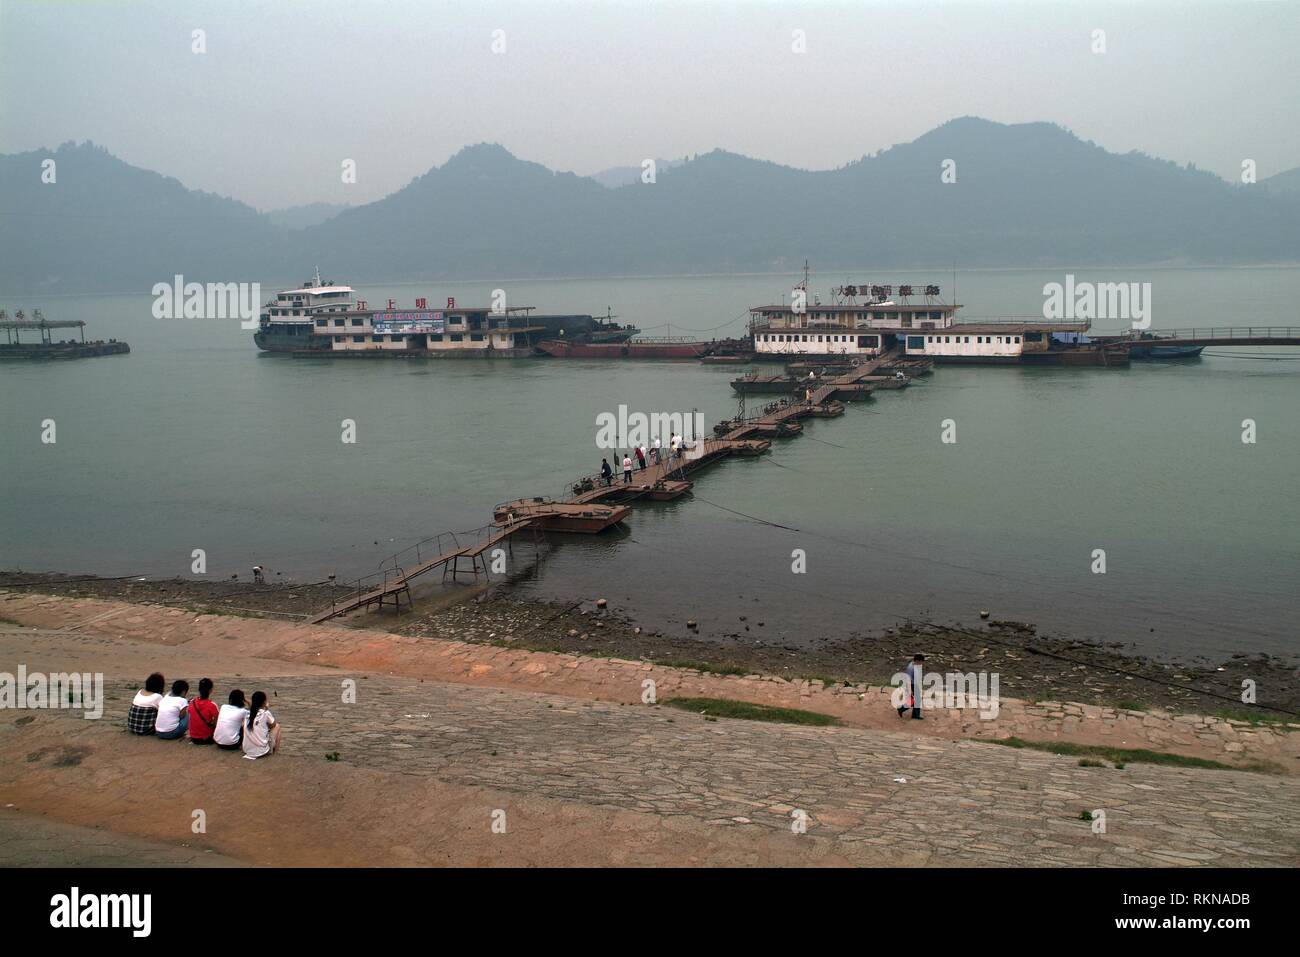 Boats harbouring on the Yantze River at Yichang, the first major city downstream from the Three Gorges Dam. The world's largest electricity-generating Stock Photo